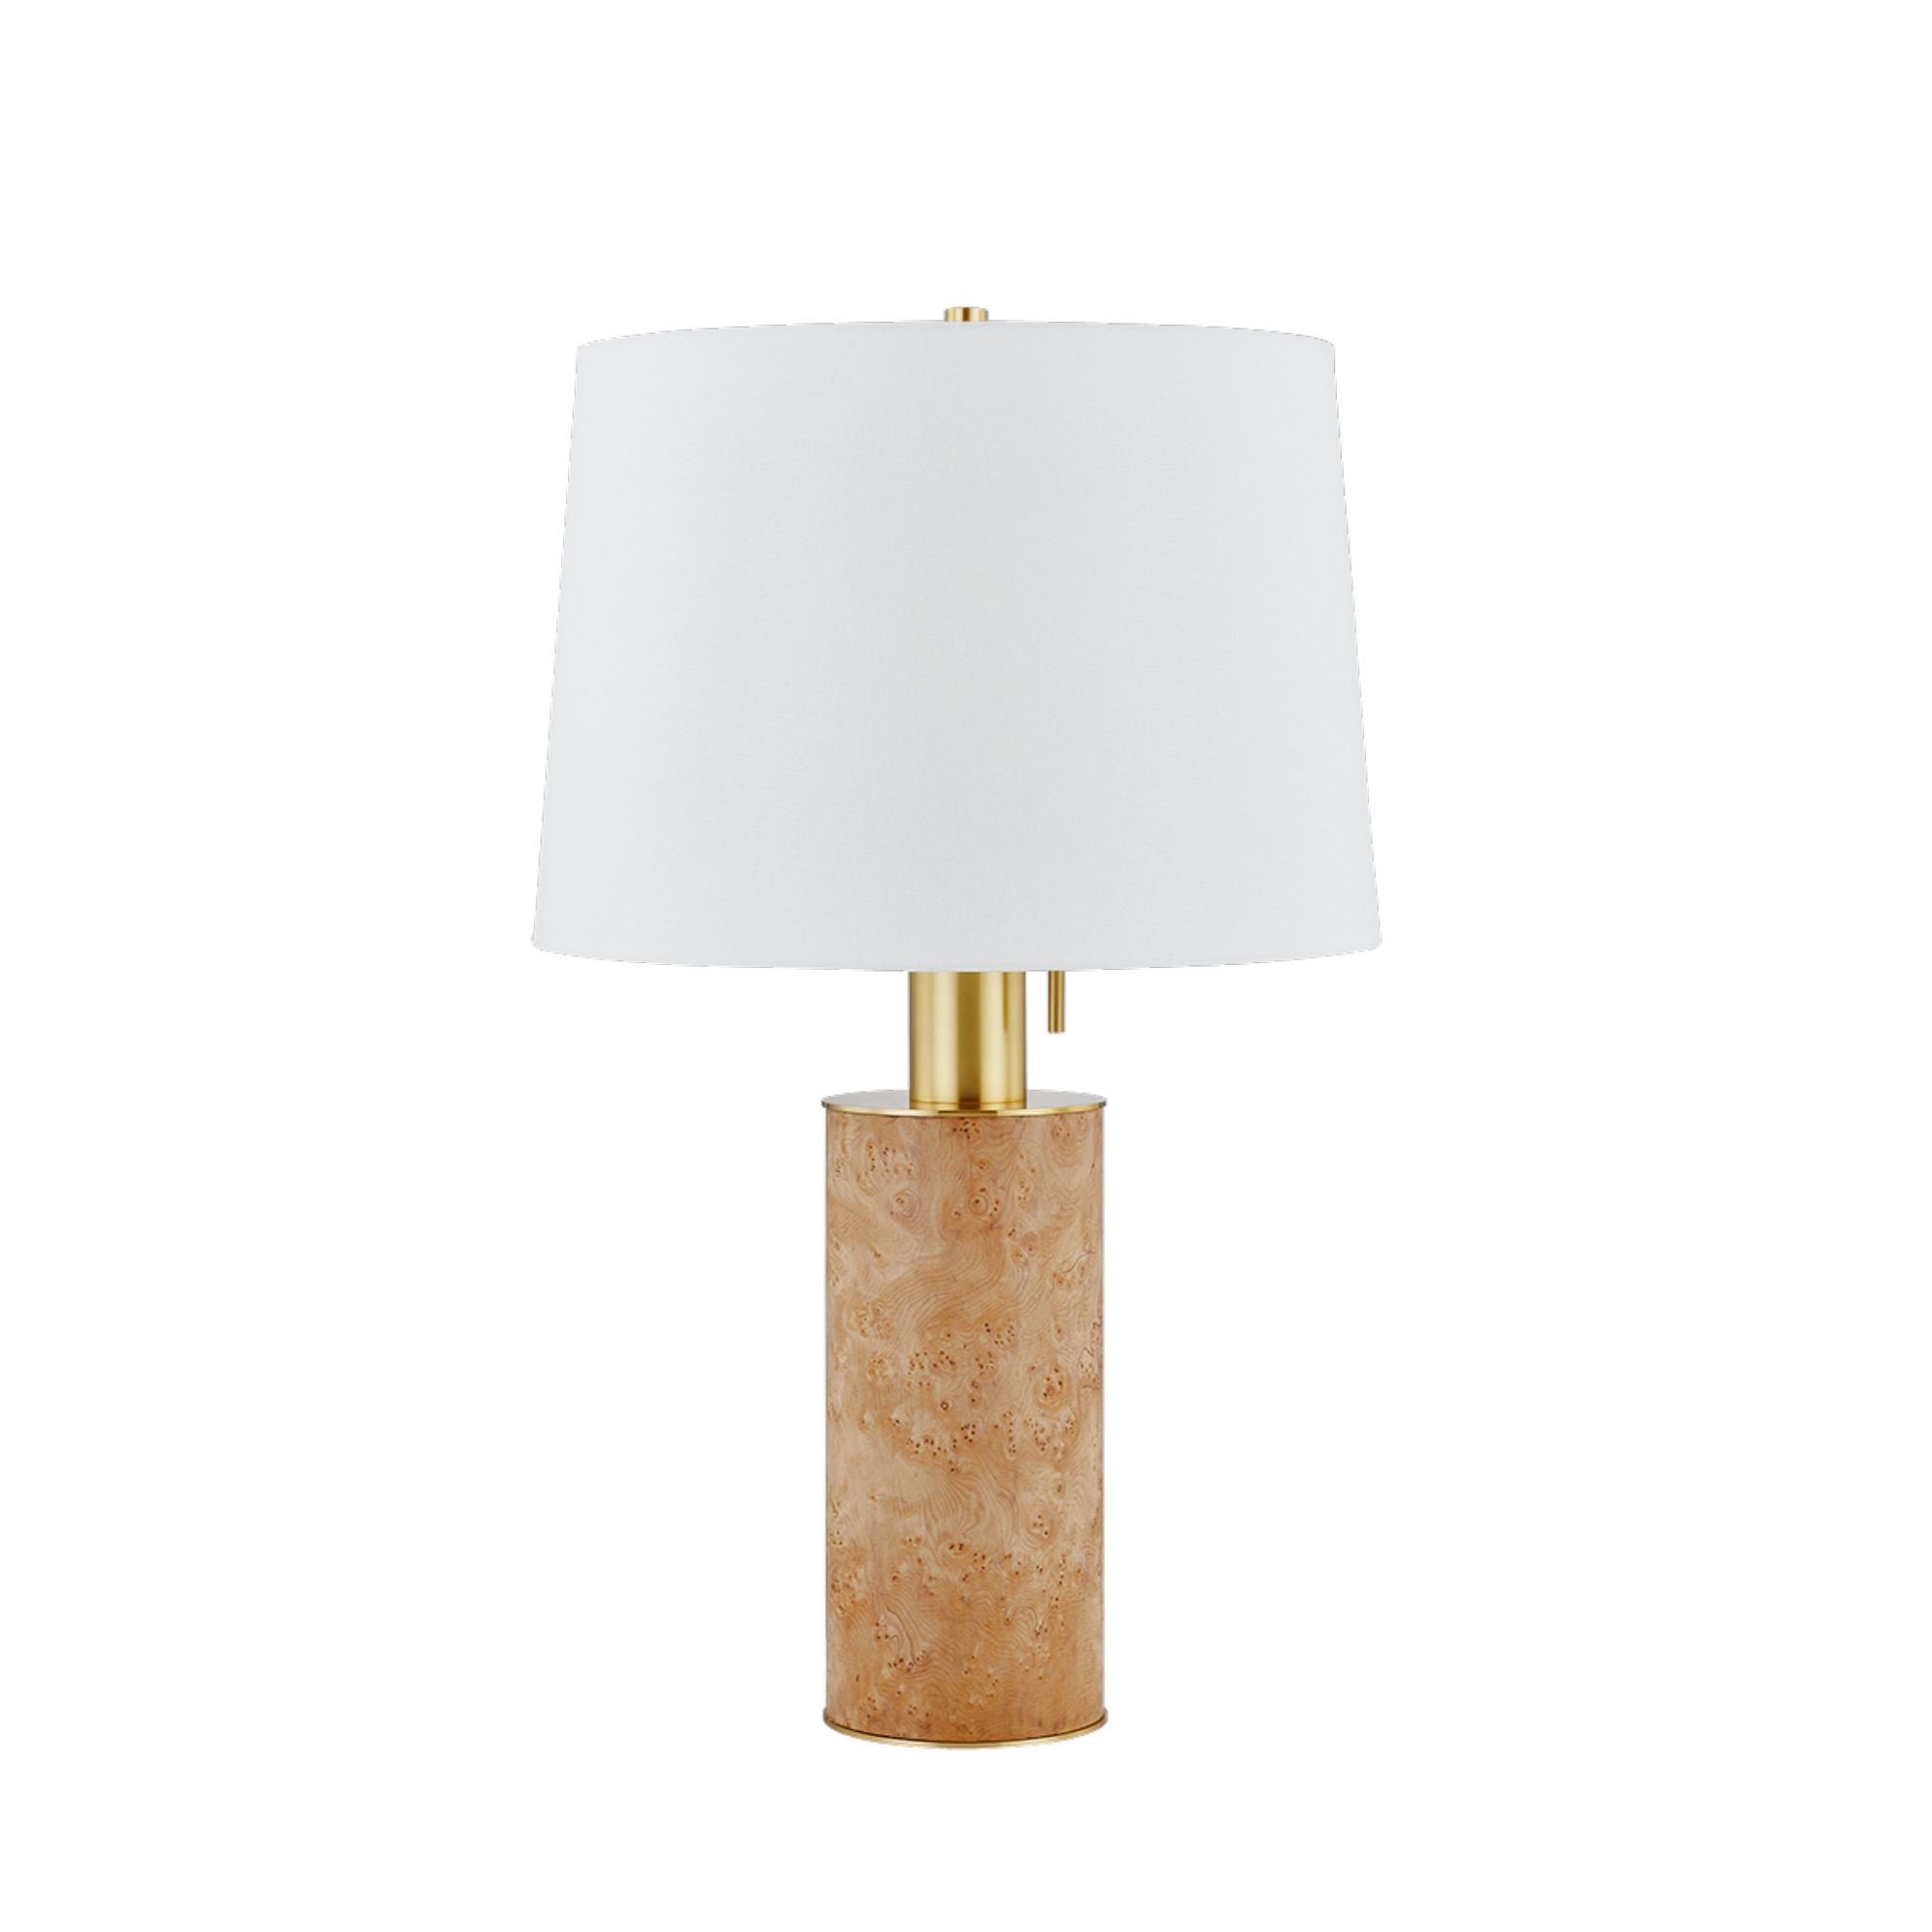 Clarissa 1-Light Table Lamp in Aged Brass